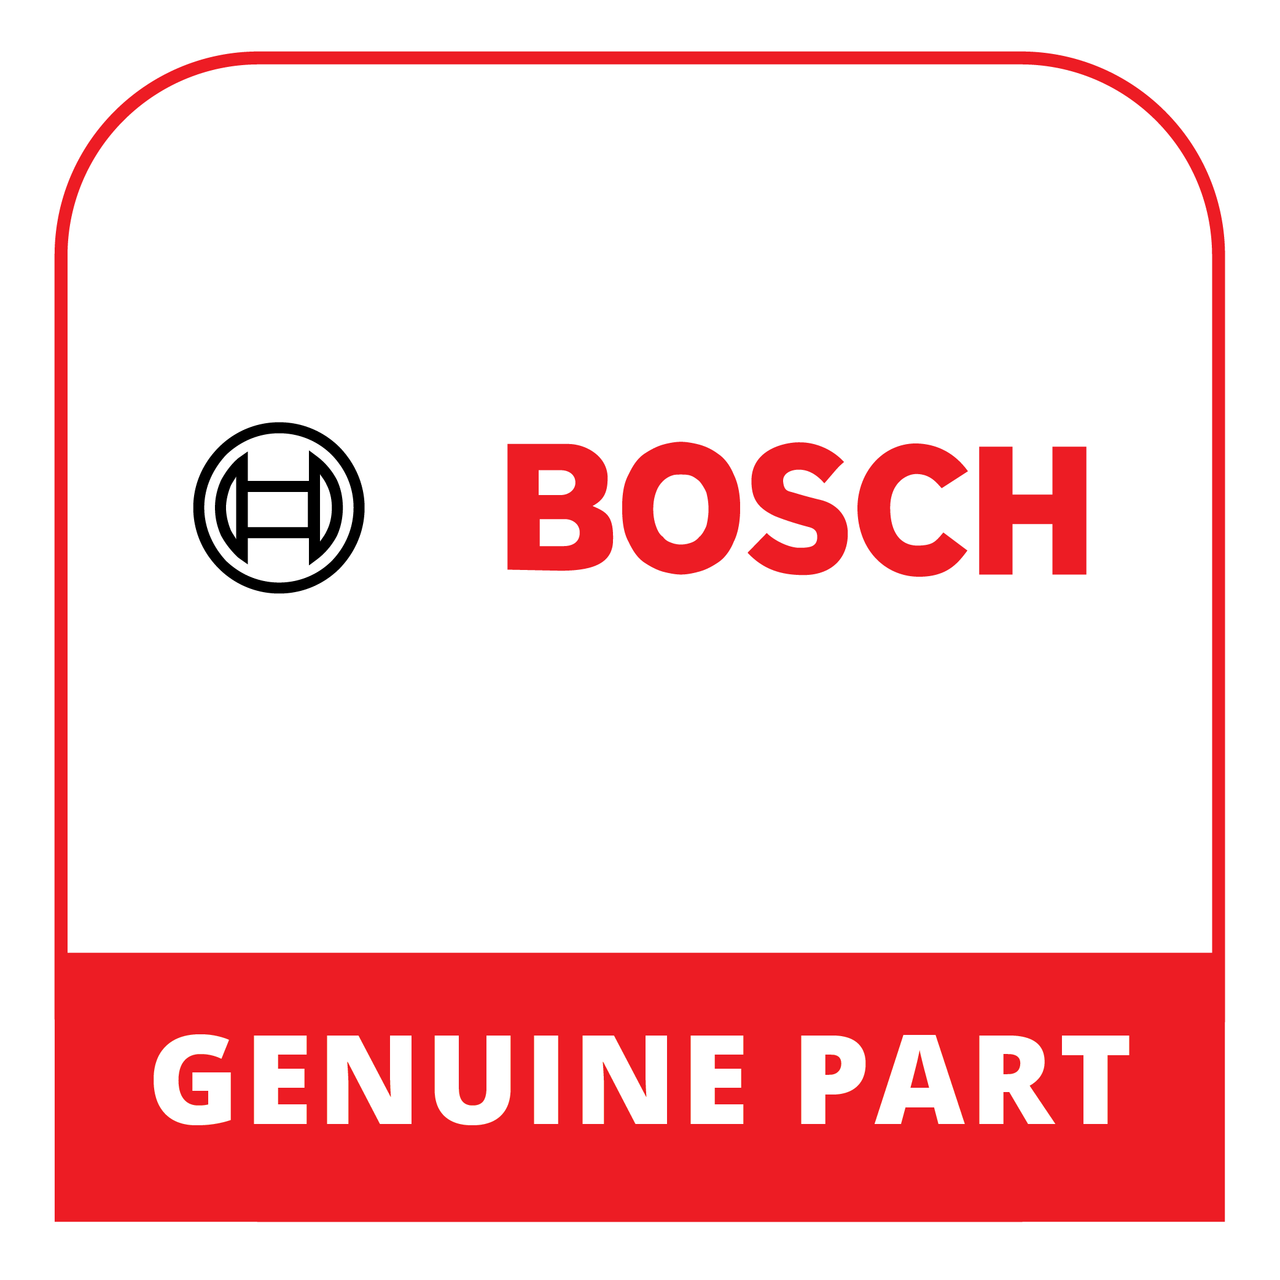 Bosch (Thermador) 20005717 - Panel - Genuine Bosch (Thermador) Part